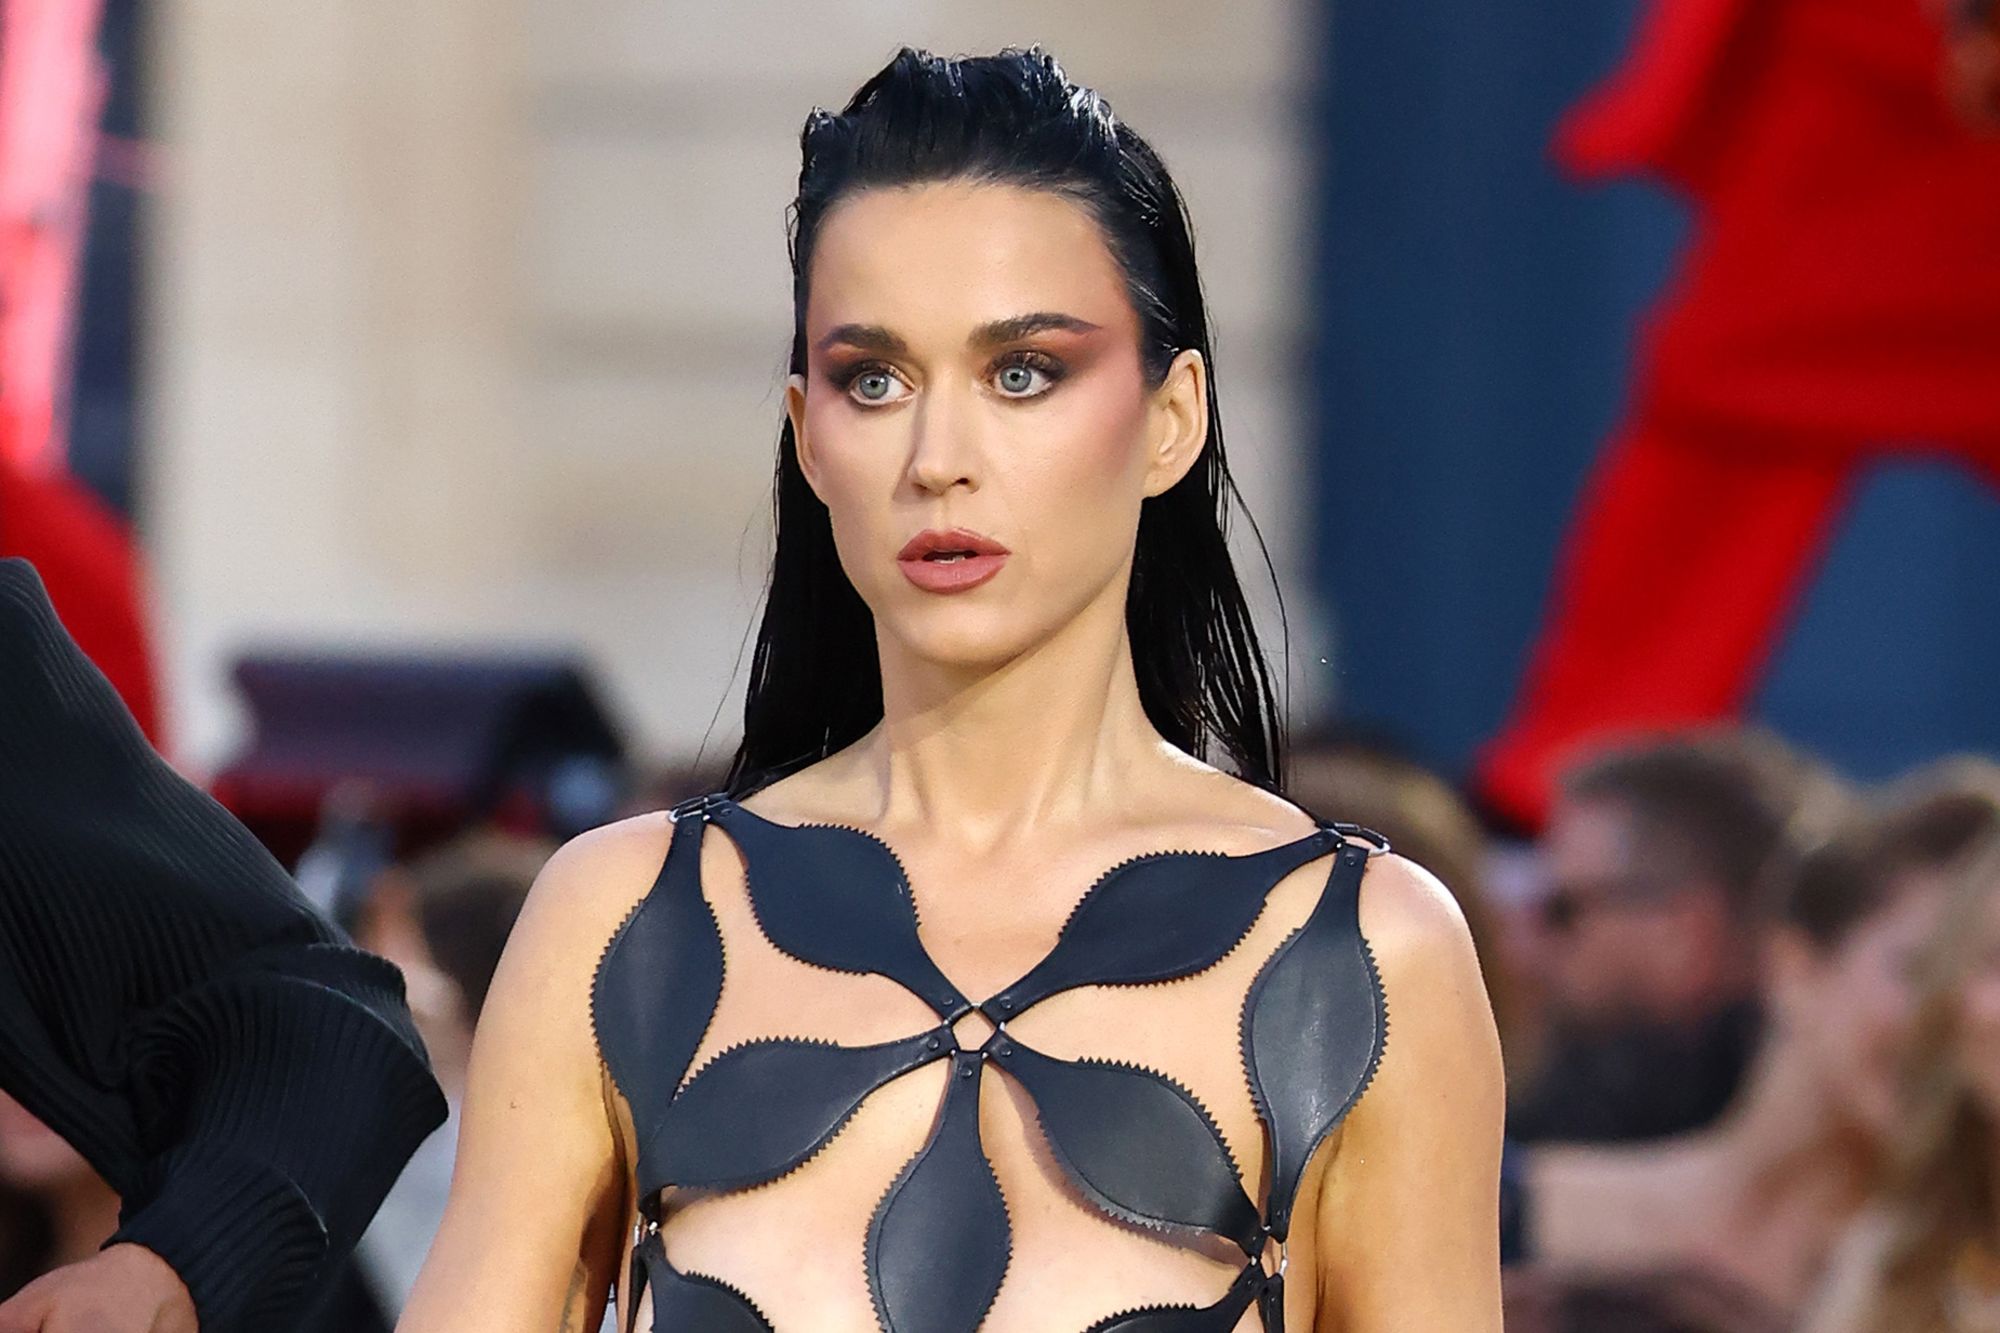 Katy Perry walked the runway in a barely-there cut out gown that was a new take on the naked dressing trend.